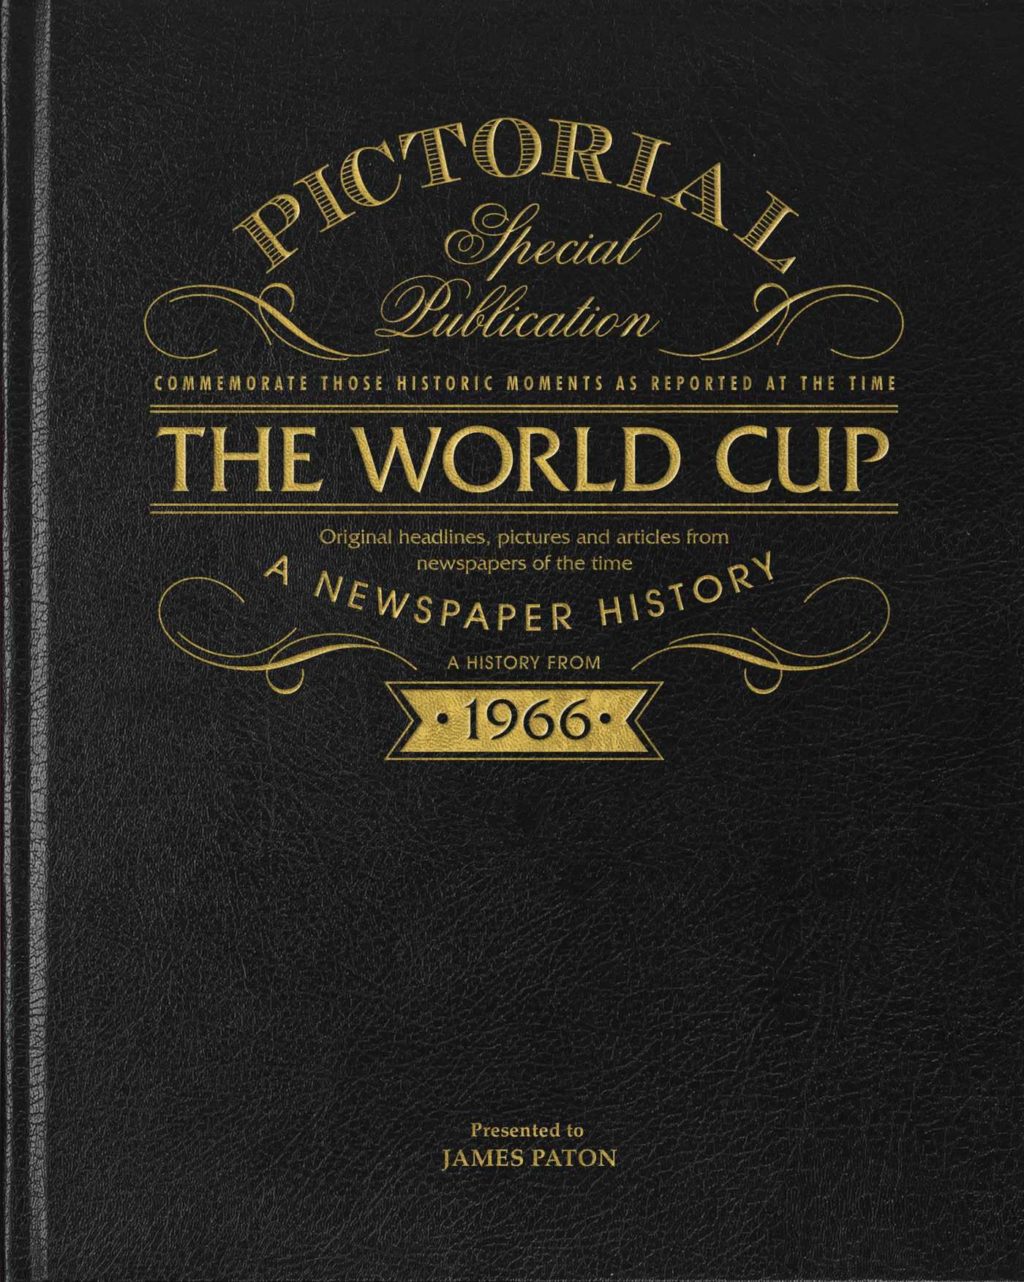 Deluxe Black Leather Pictorial Football Book